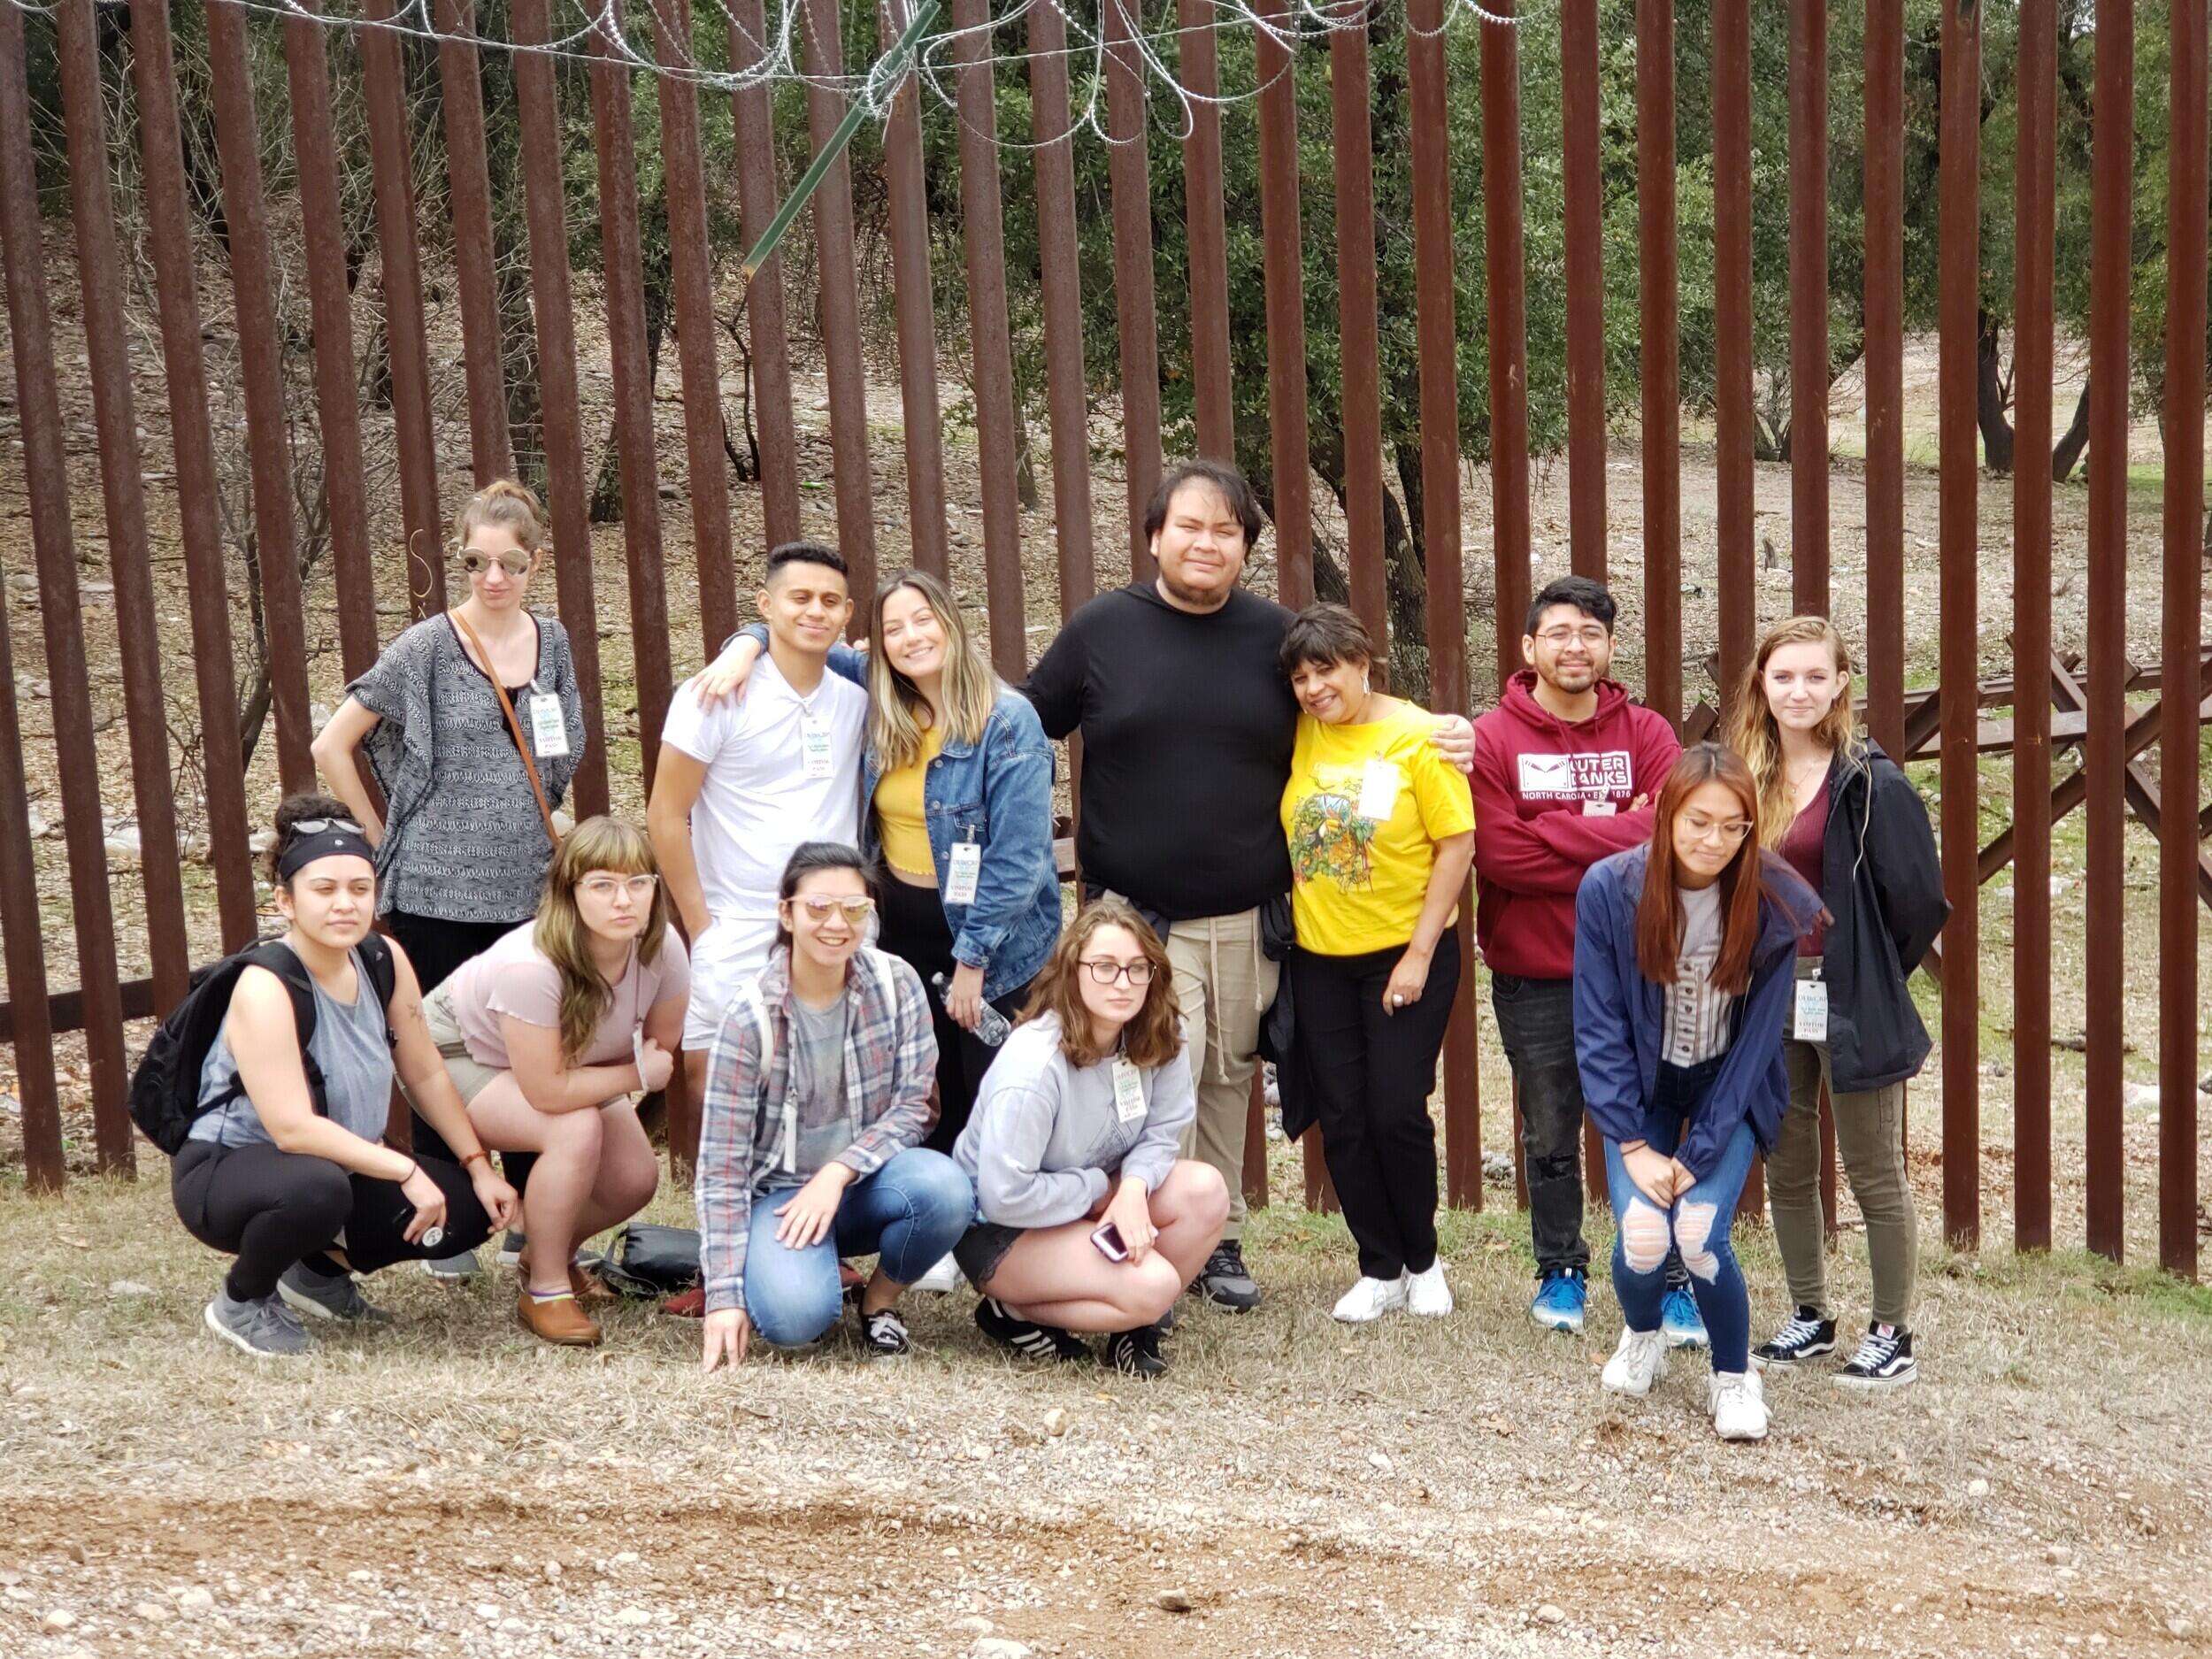 Students pose in front of the U S Mexico border wall.